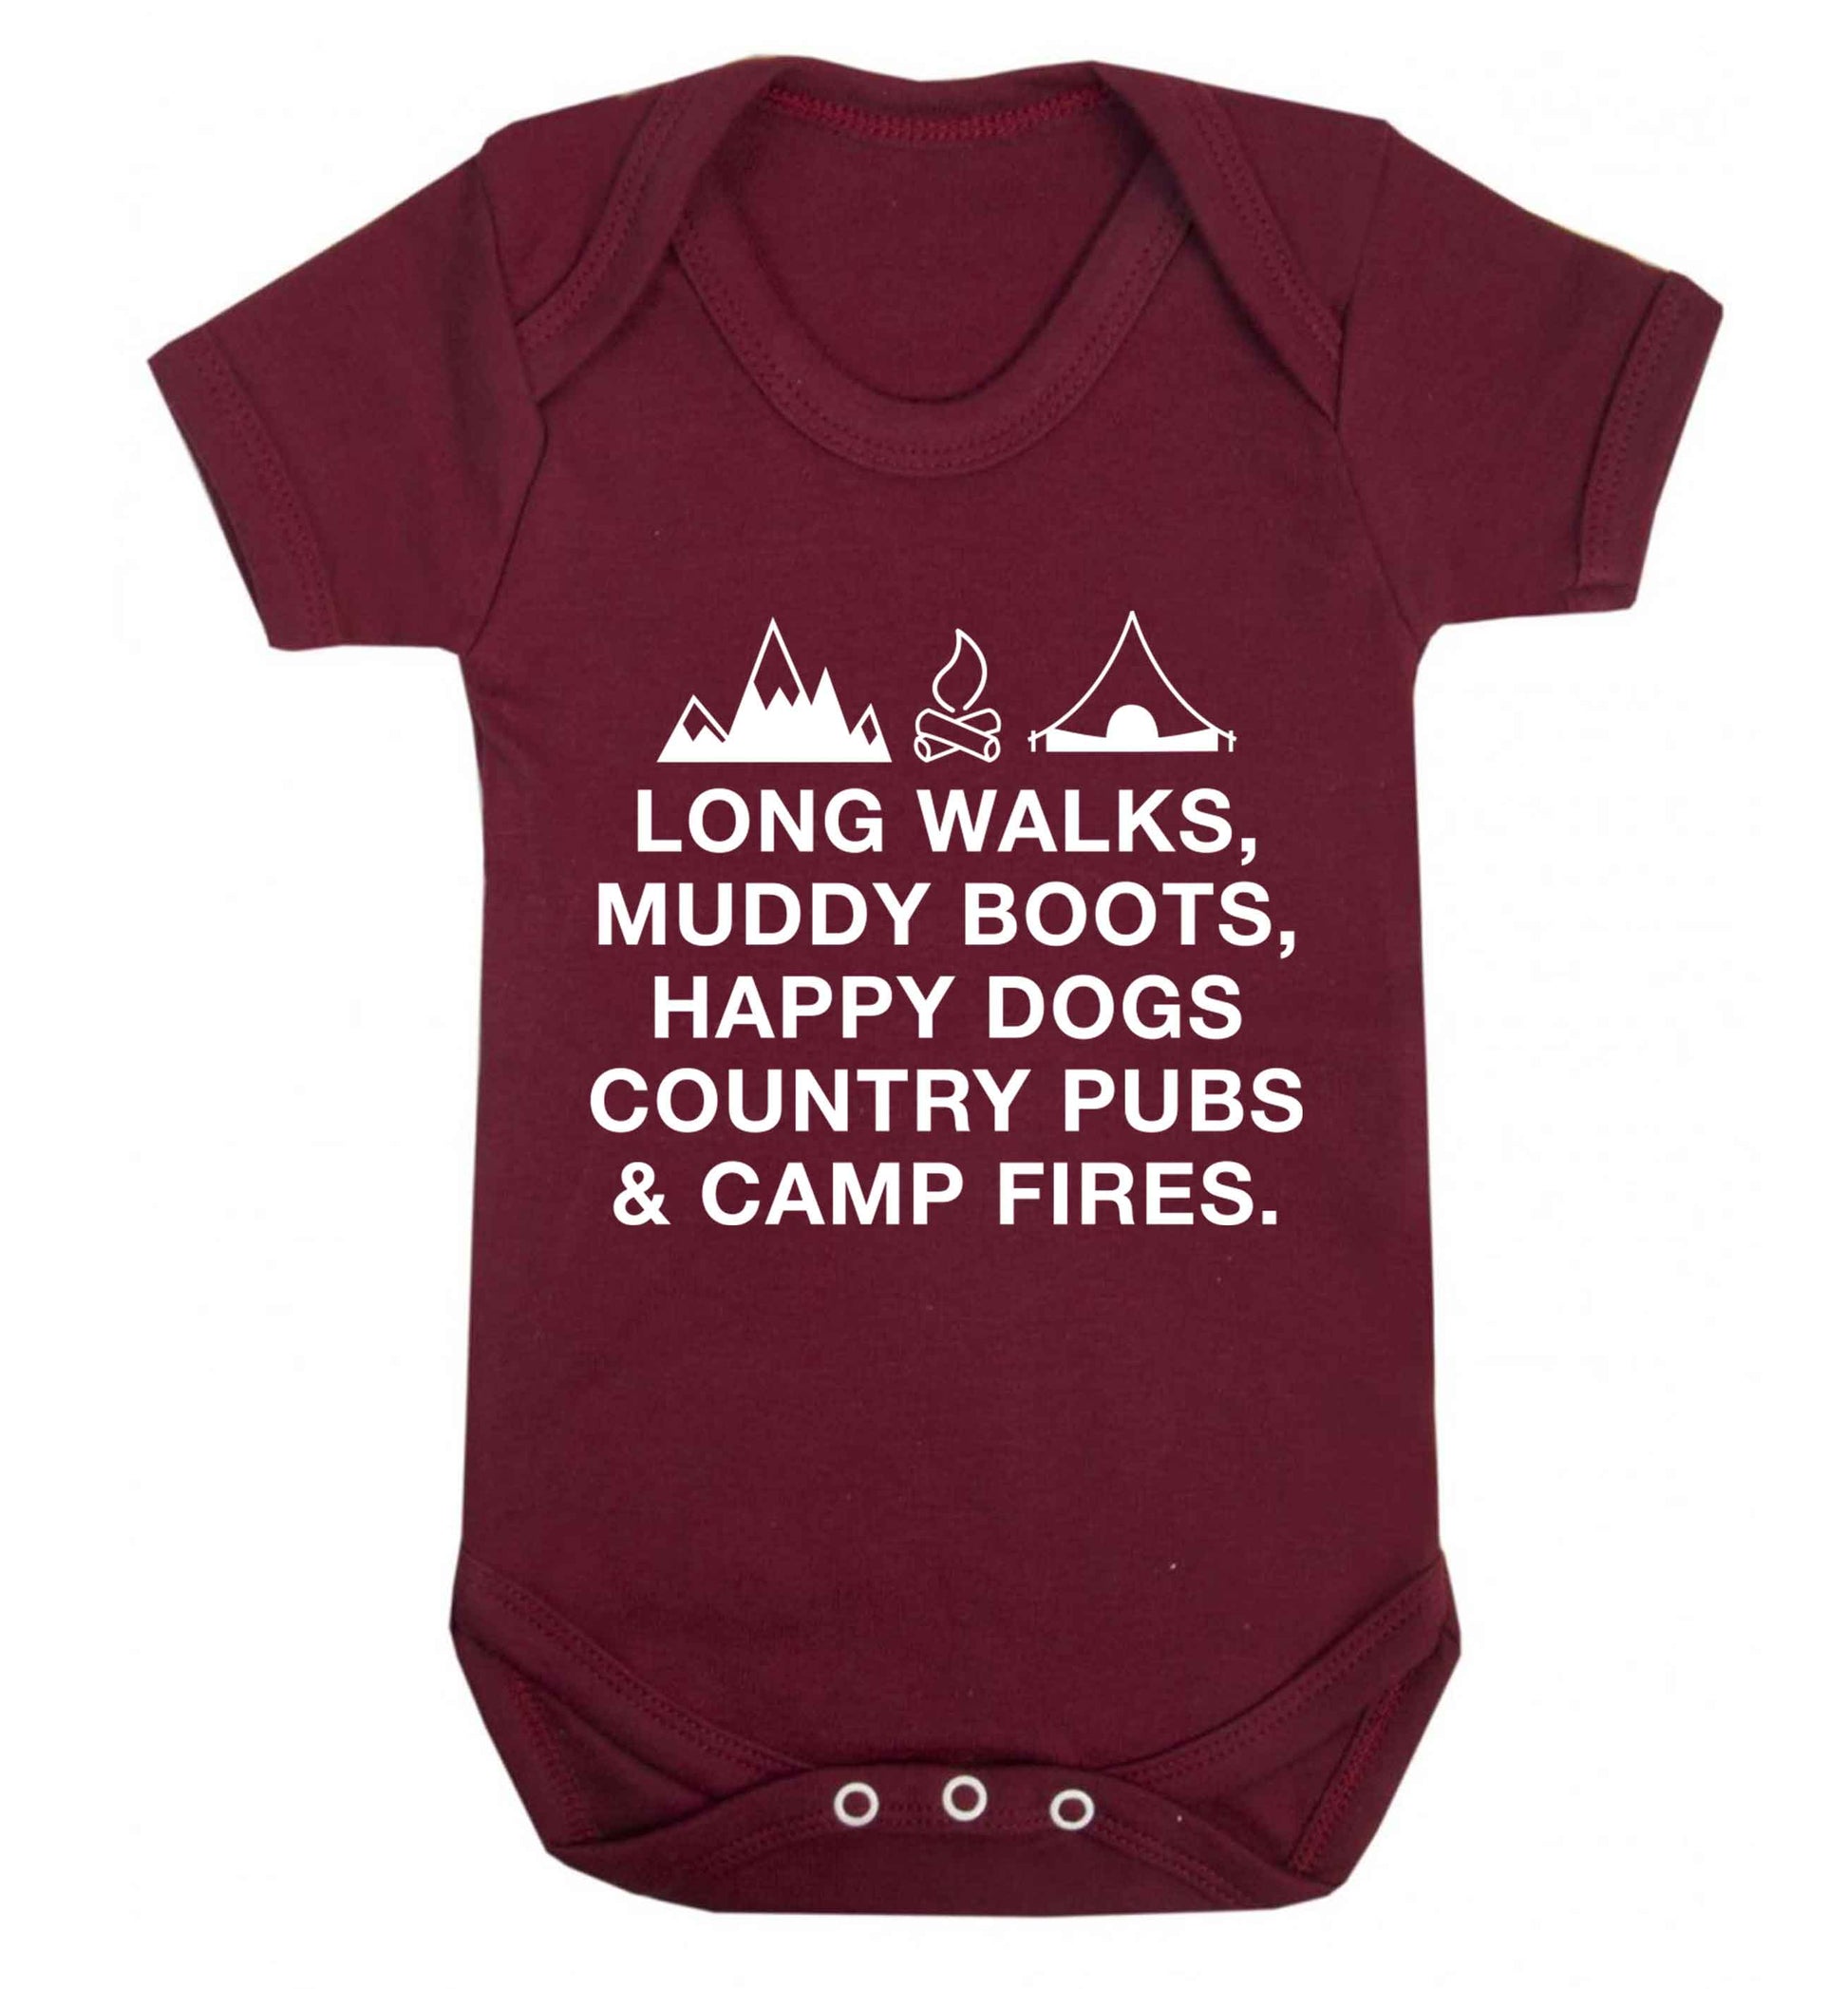 Long walks muddy boots happy dogs country pubs and camp fires Baby Vest maroon 18-24 months